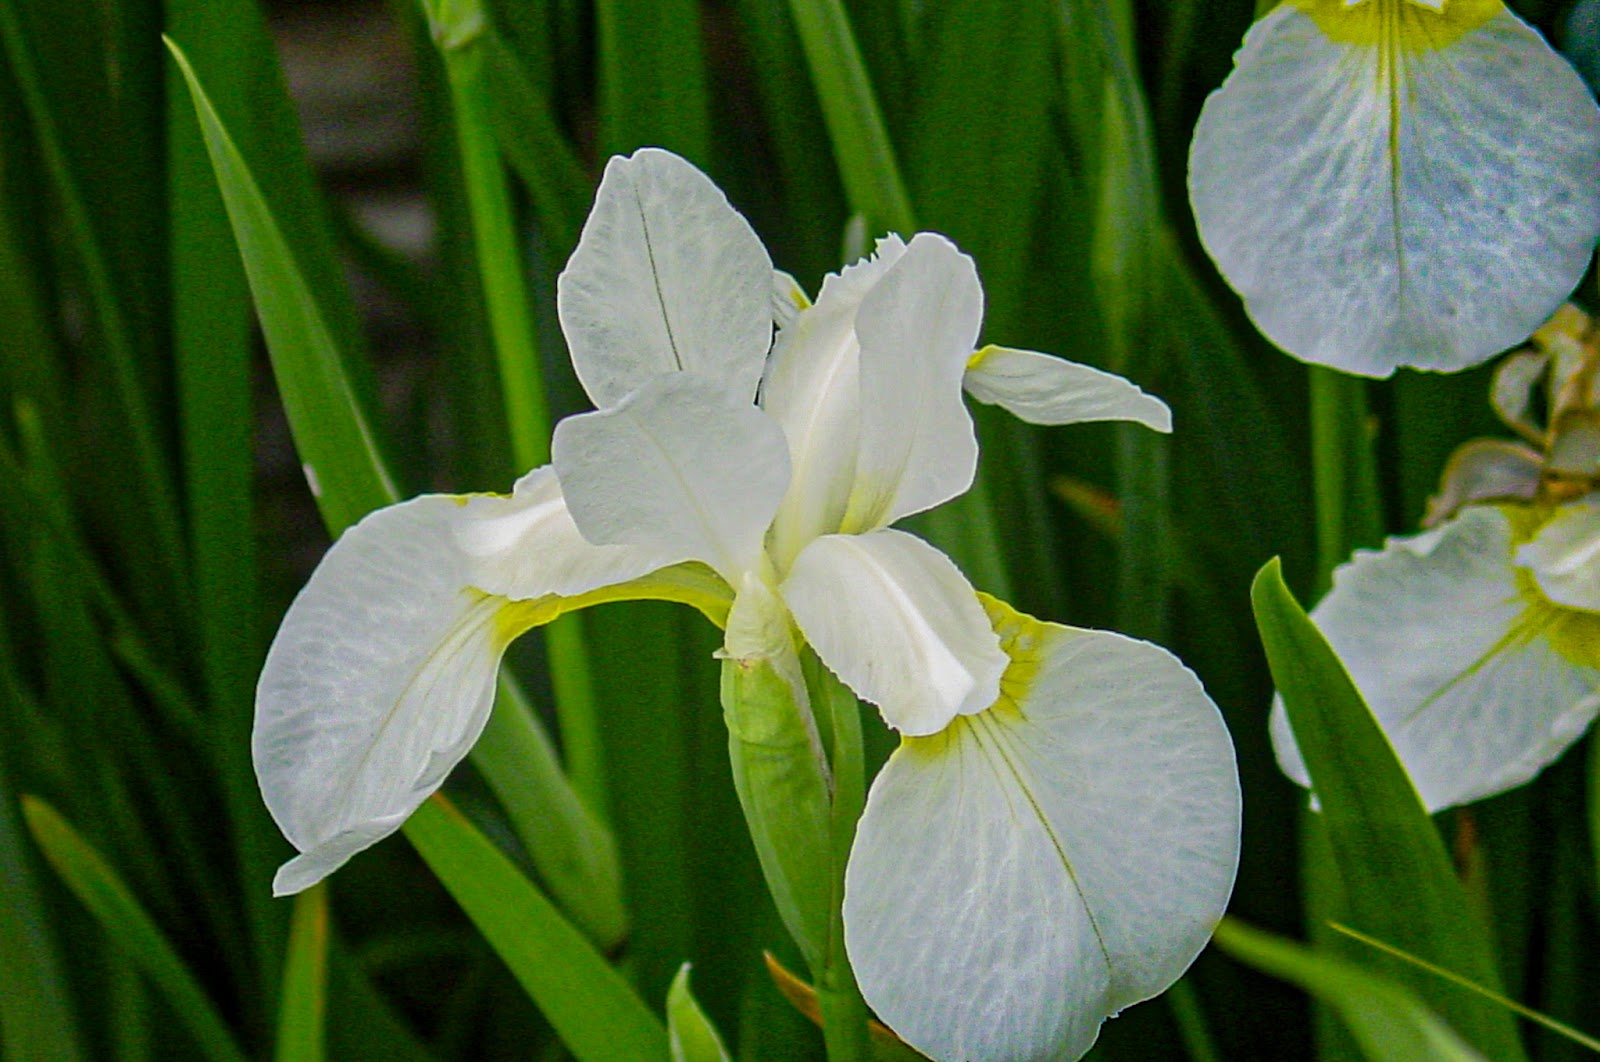 A white iris with yellow highlights